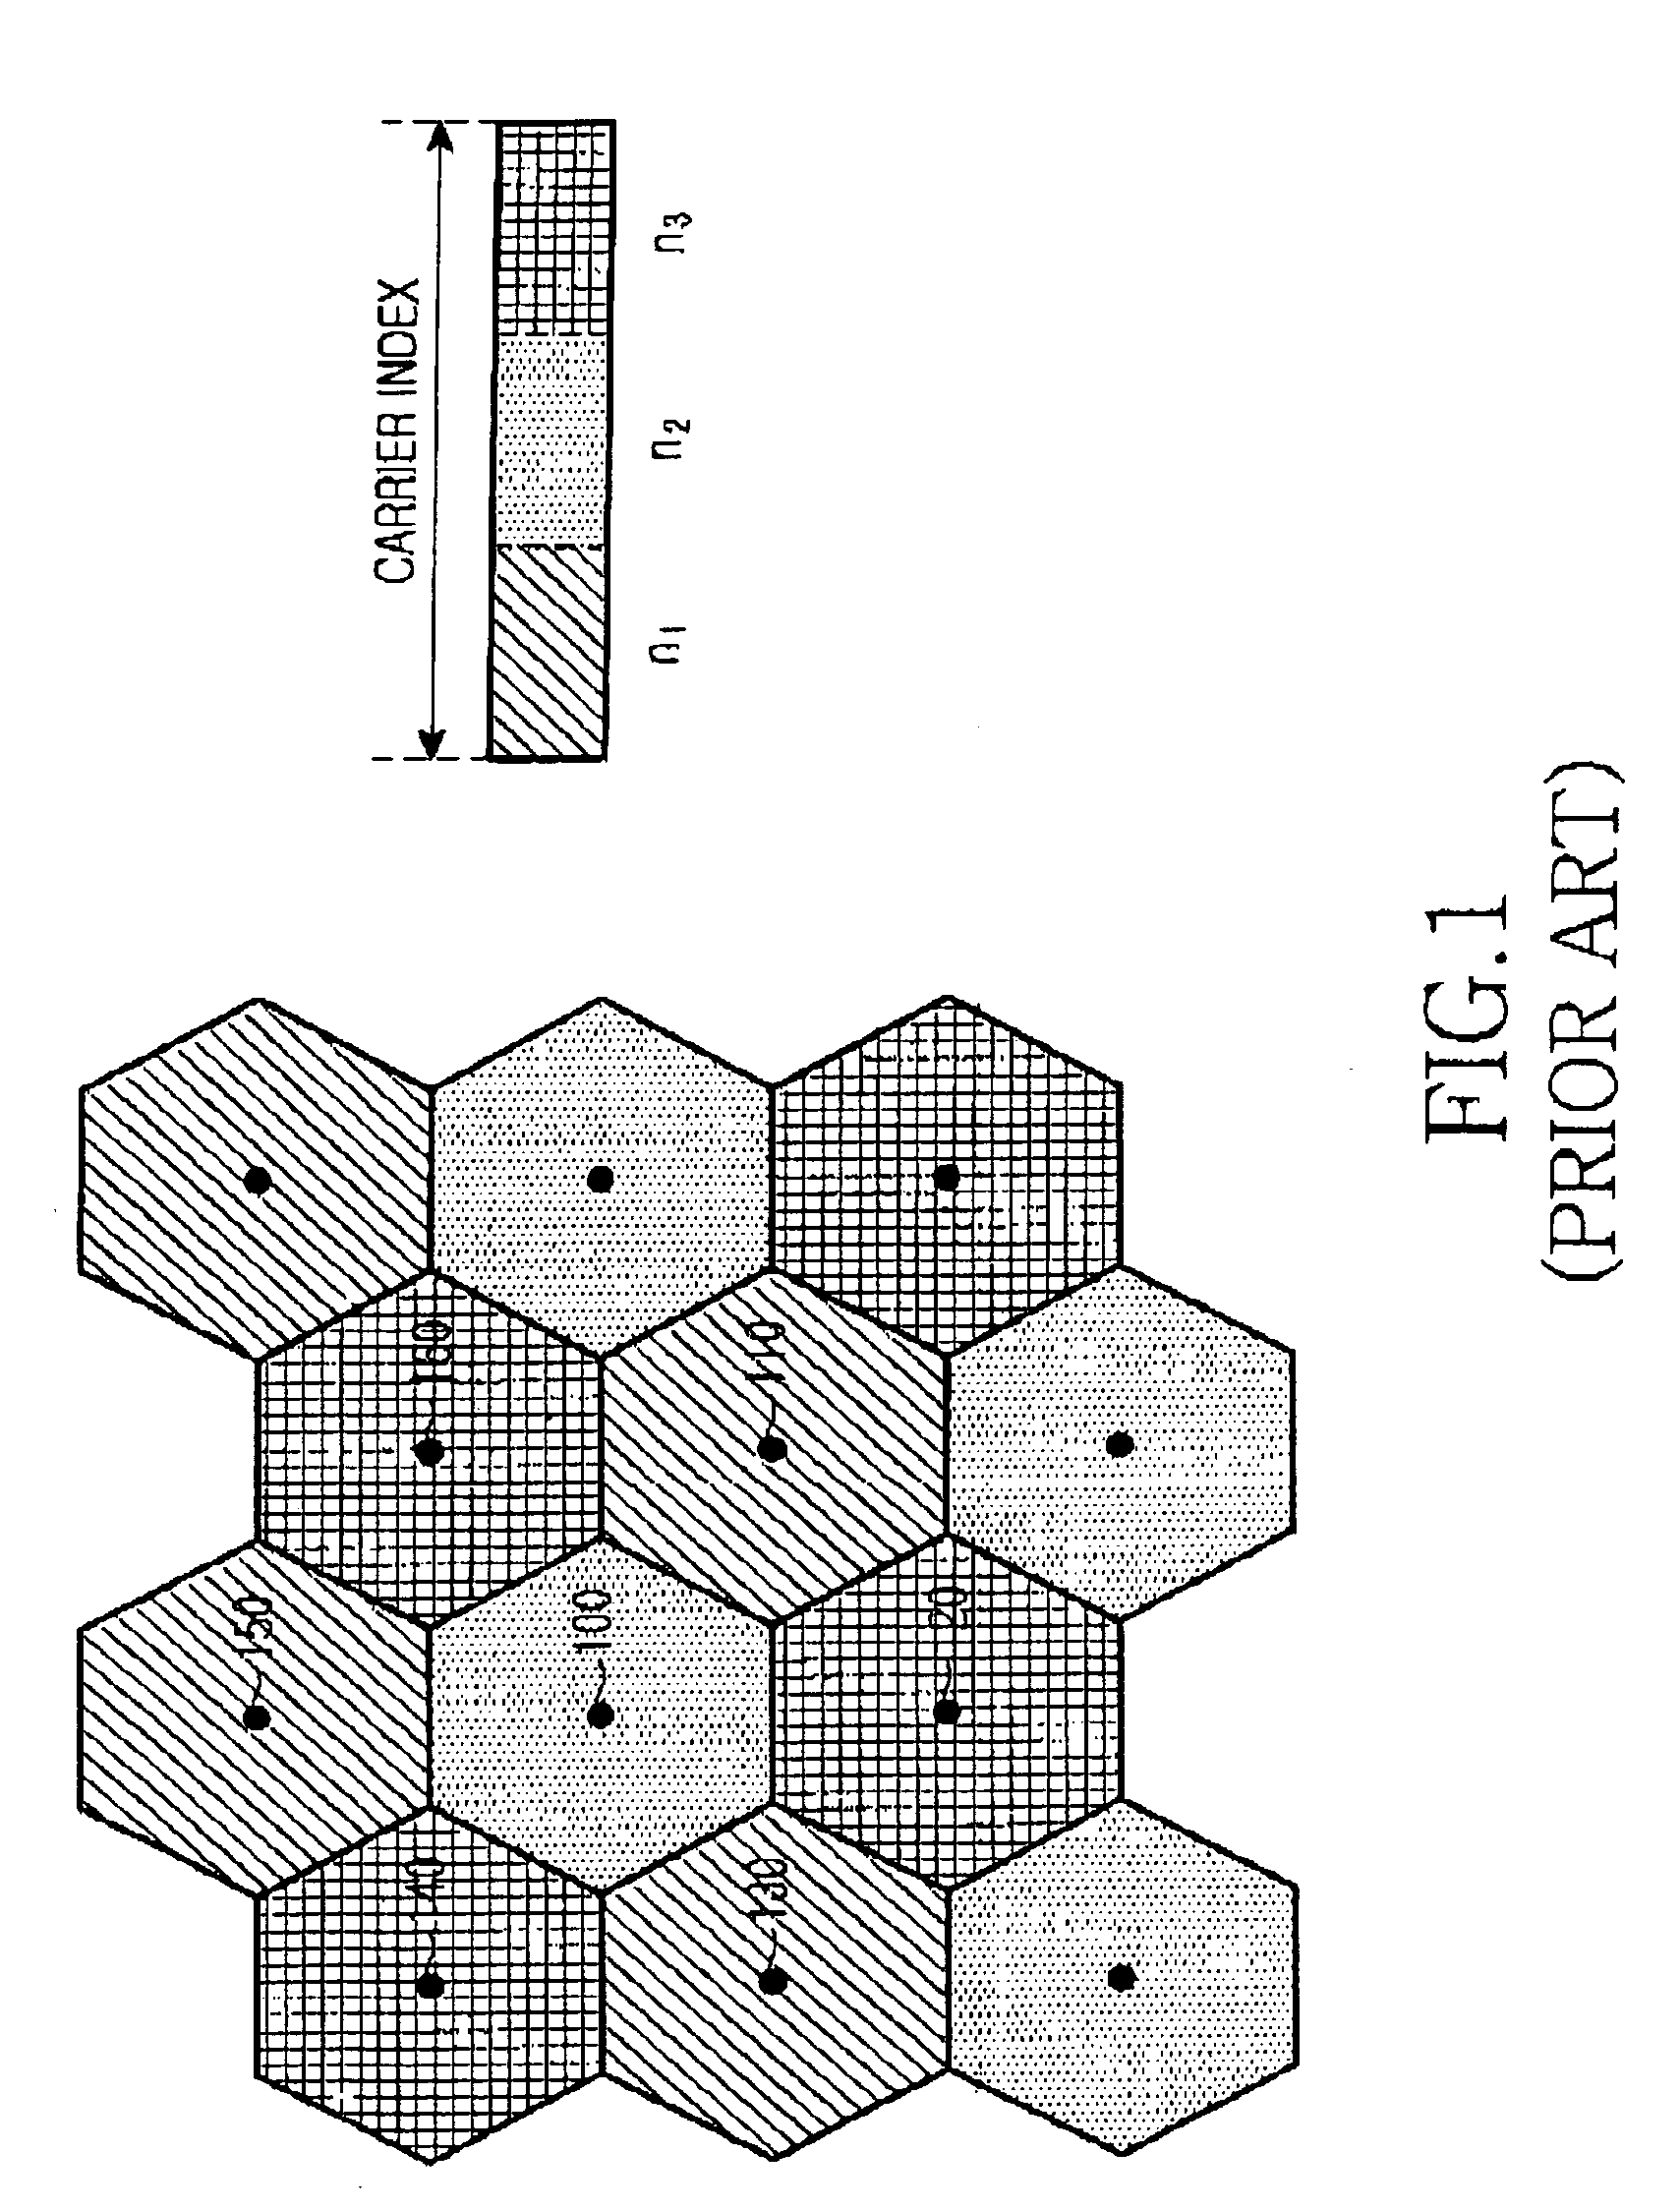 Method and apparatus for allocating channels in an orthogonal frequency division multiple access system